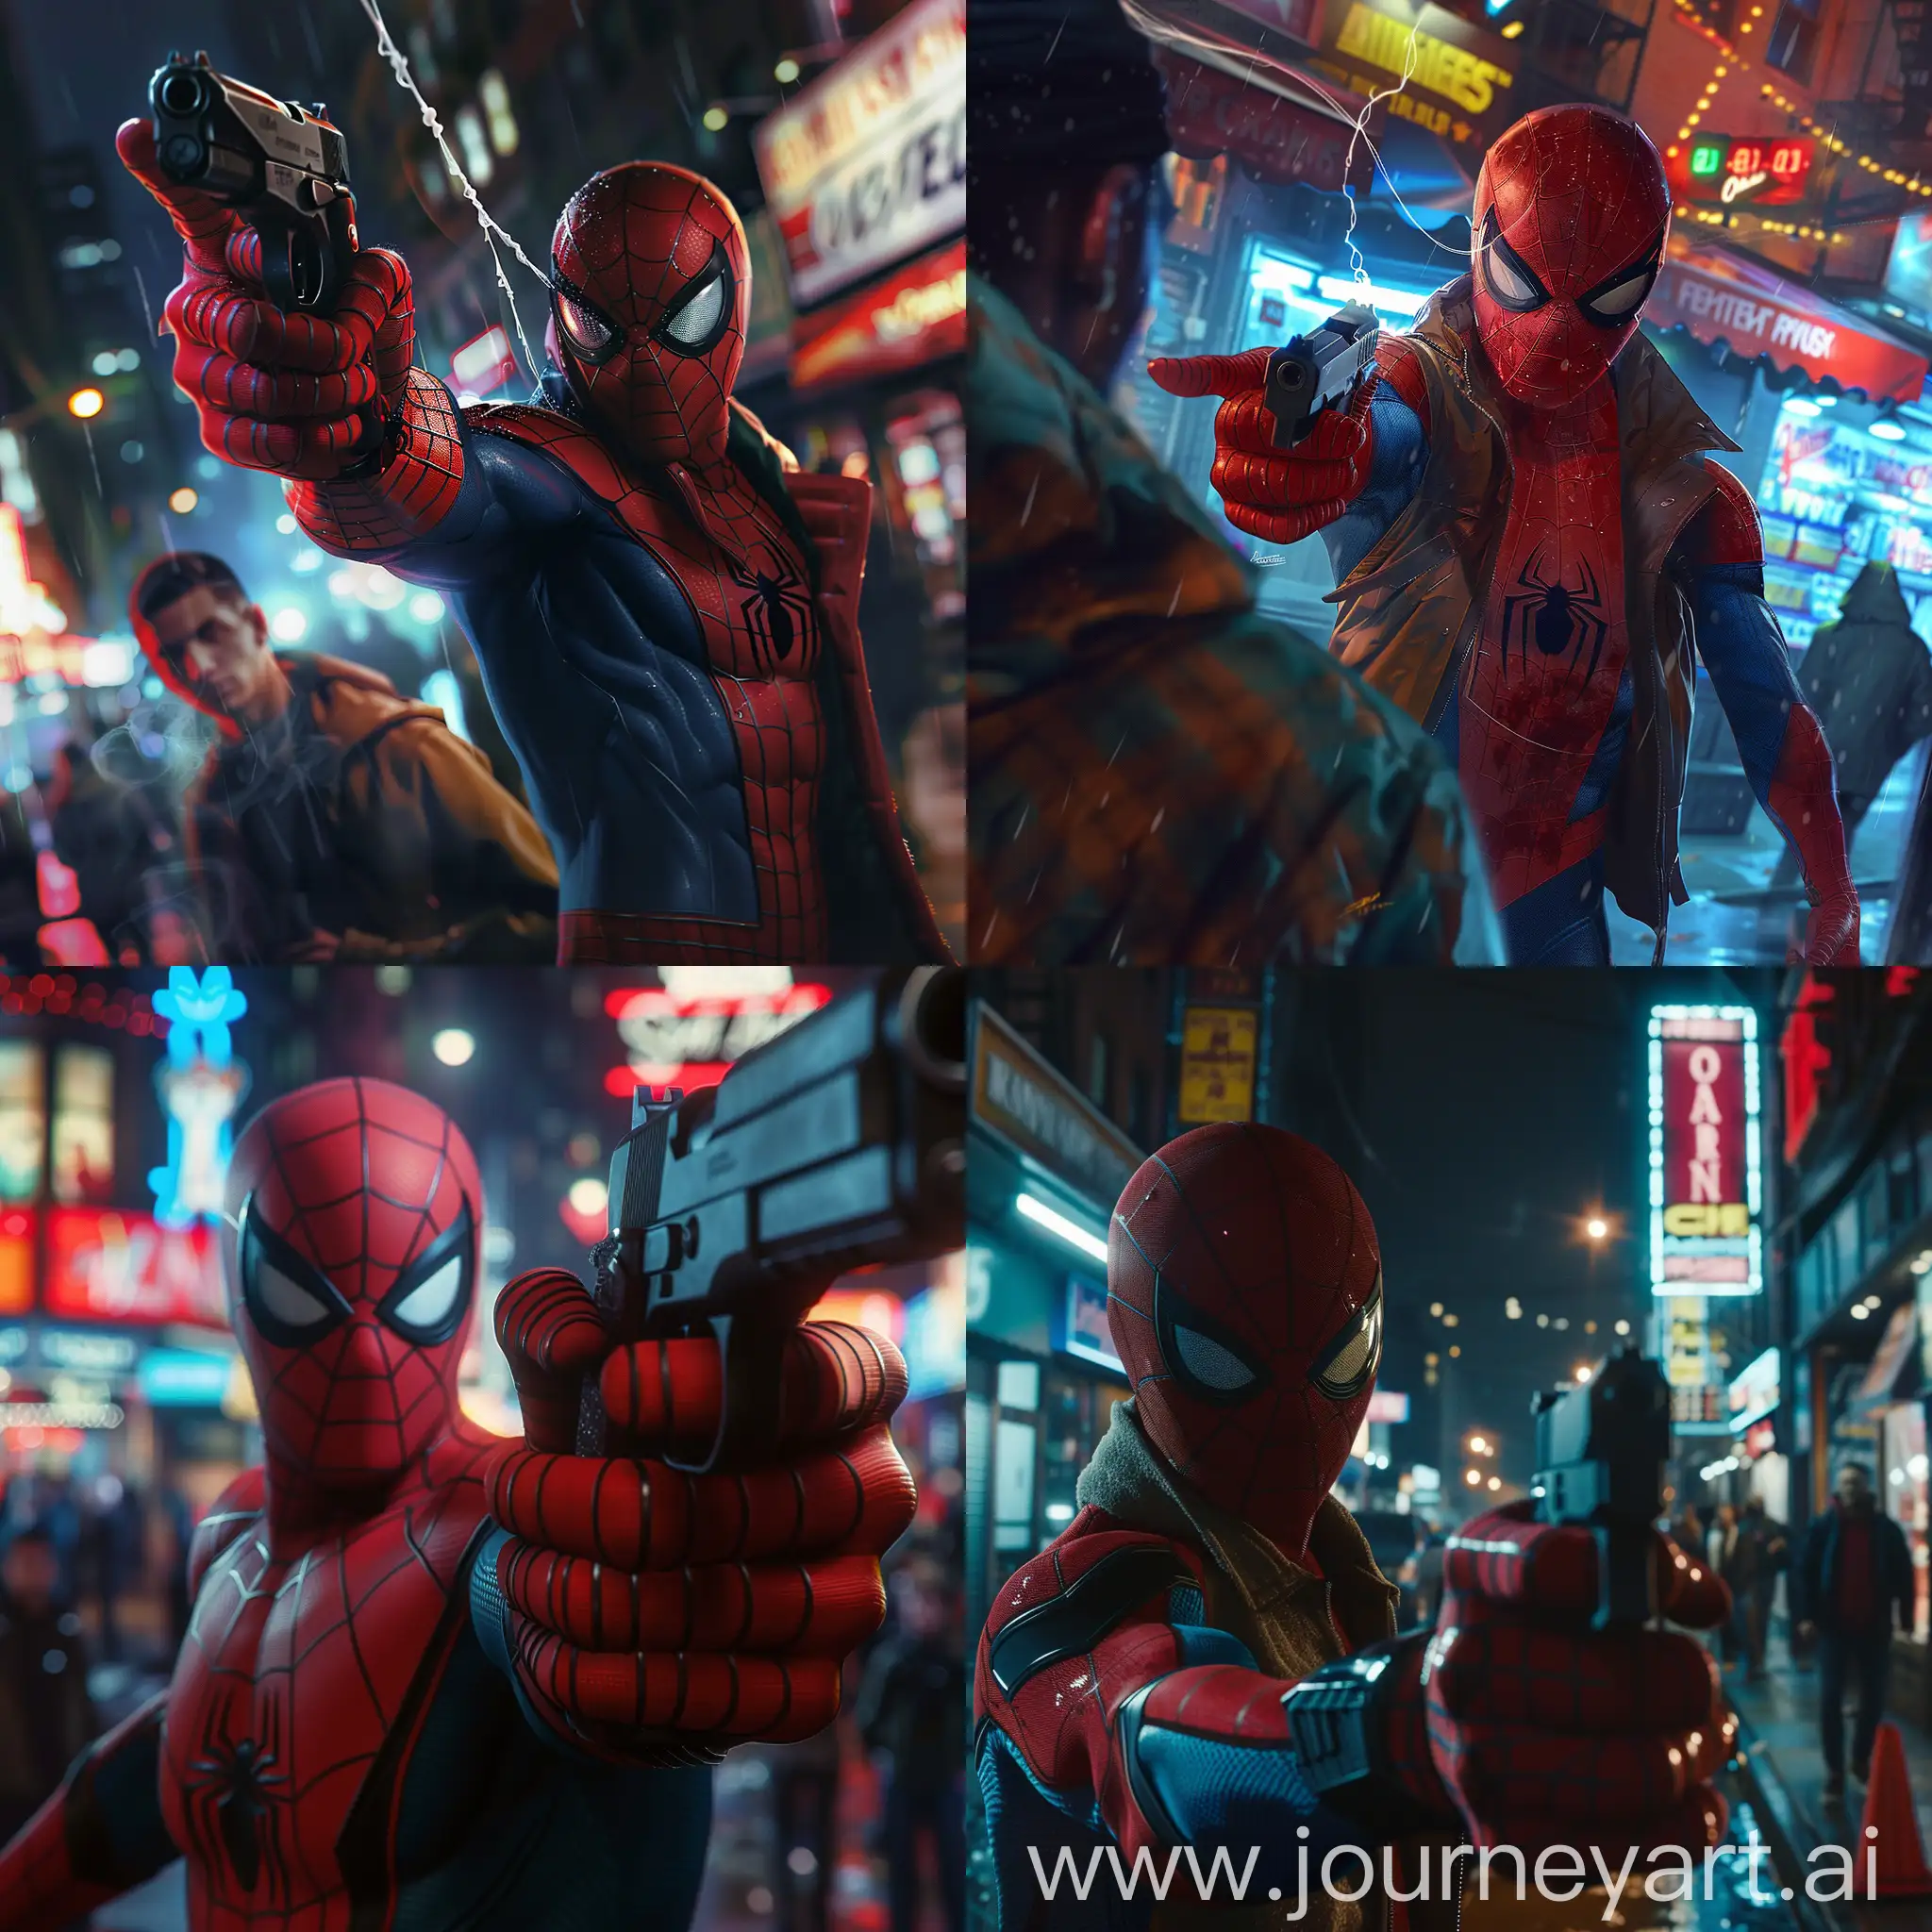 SpiderMan-Holds-Gun-at-Man-in-Nighttime-Store